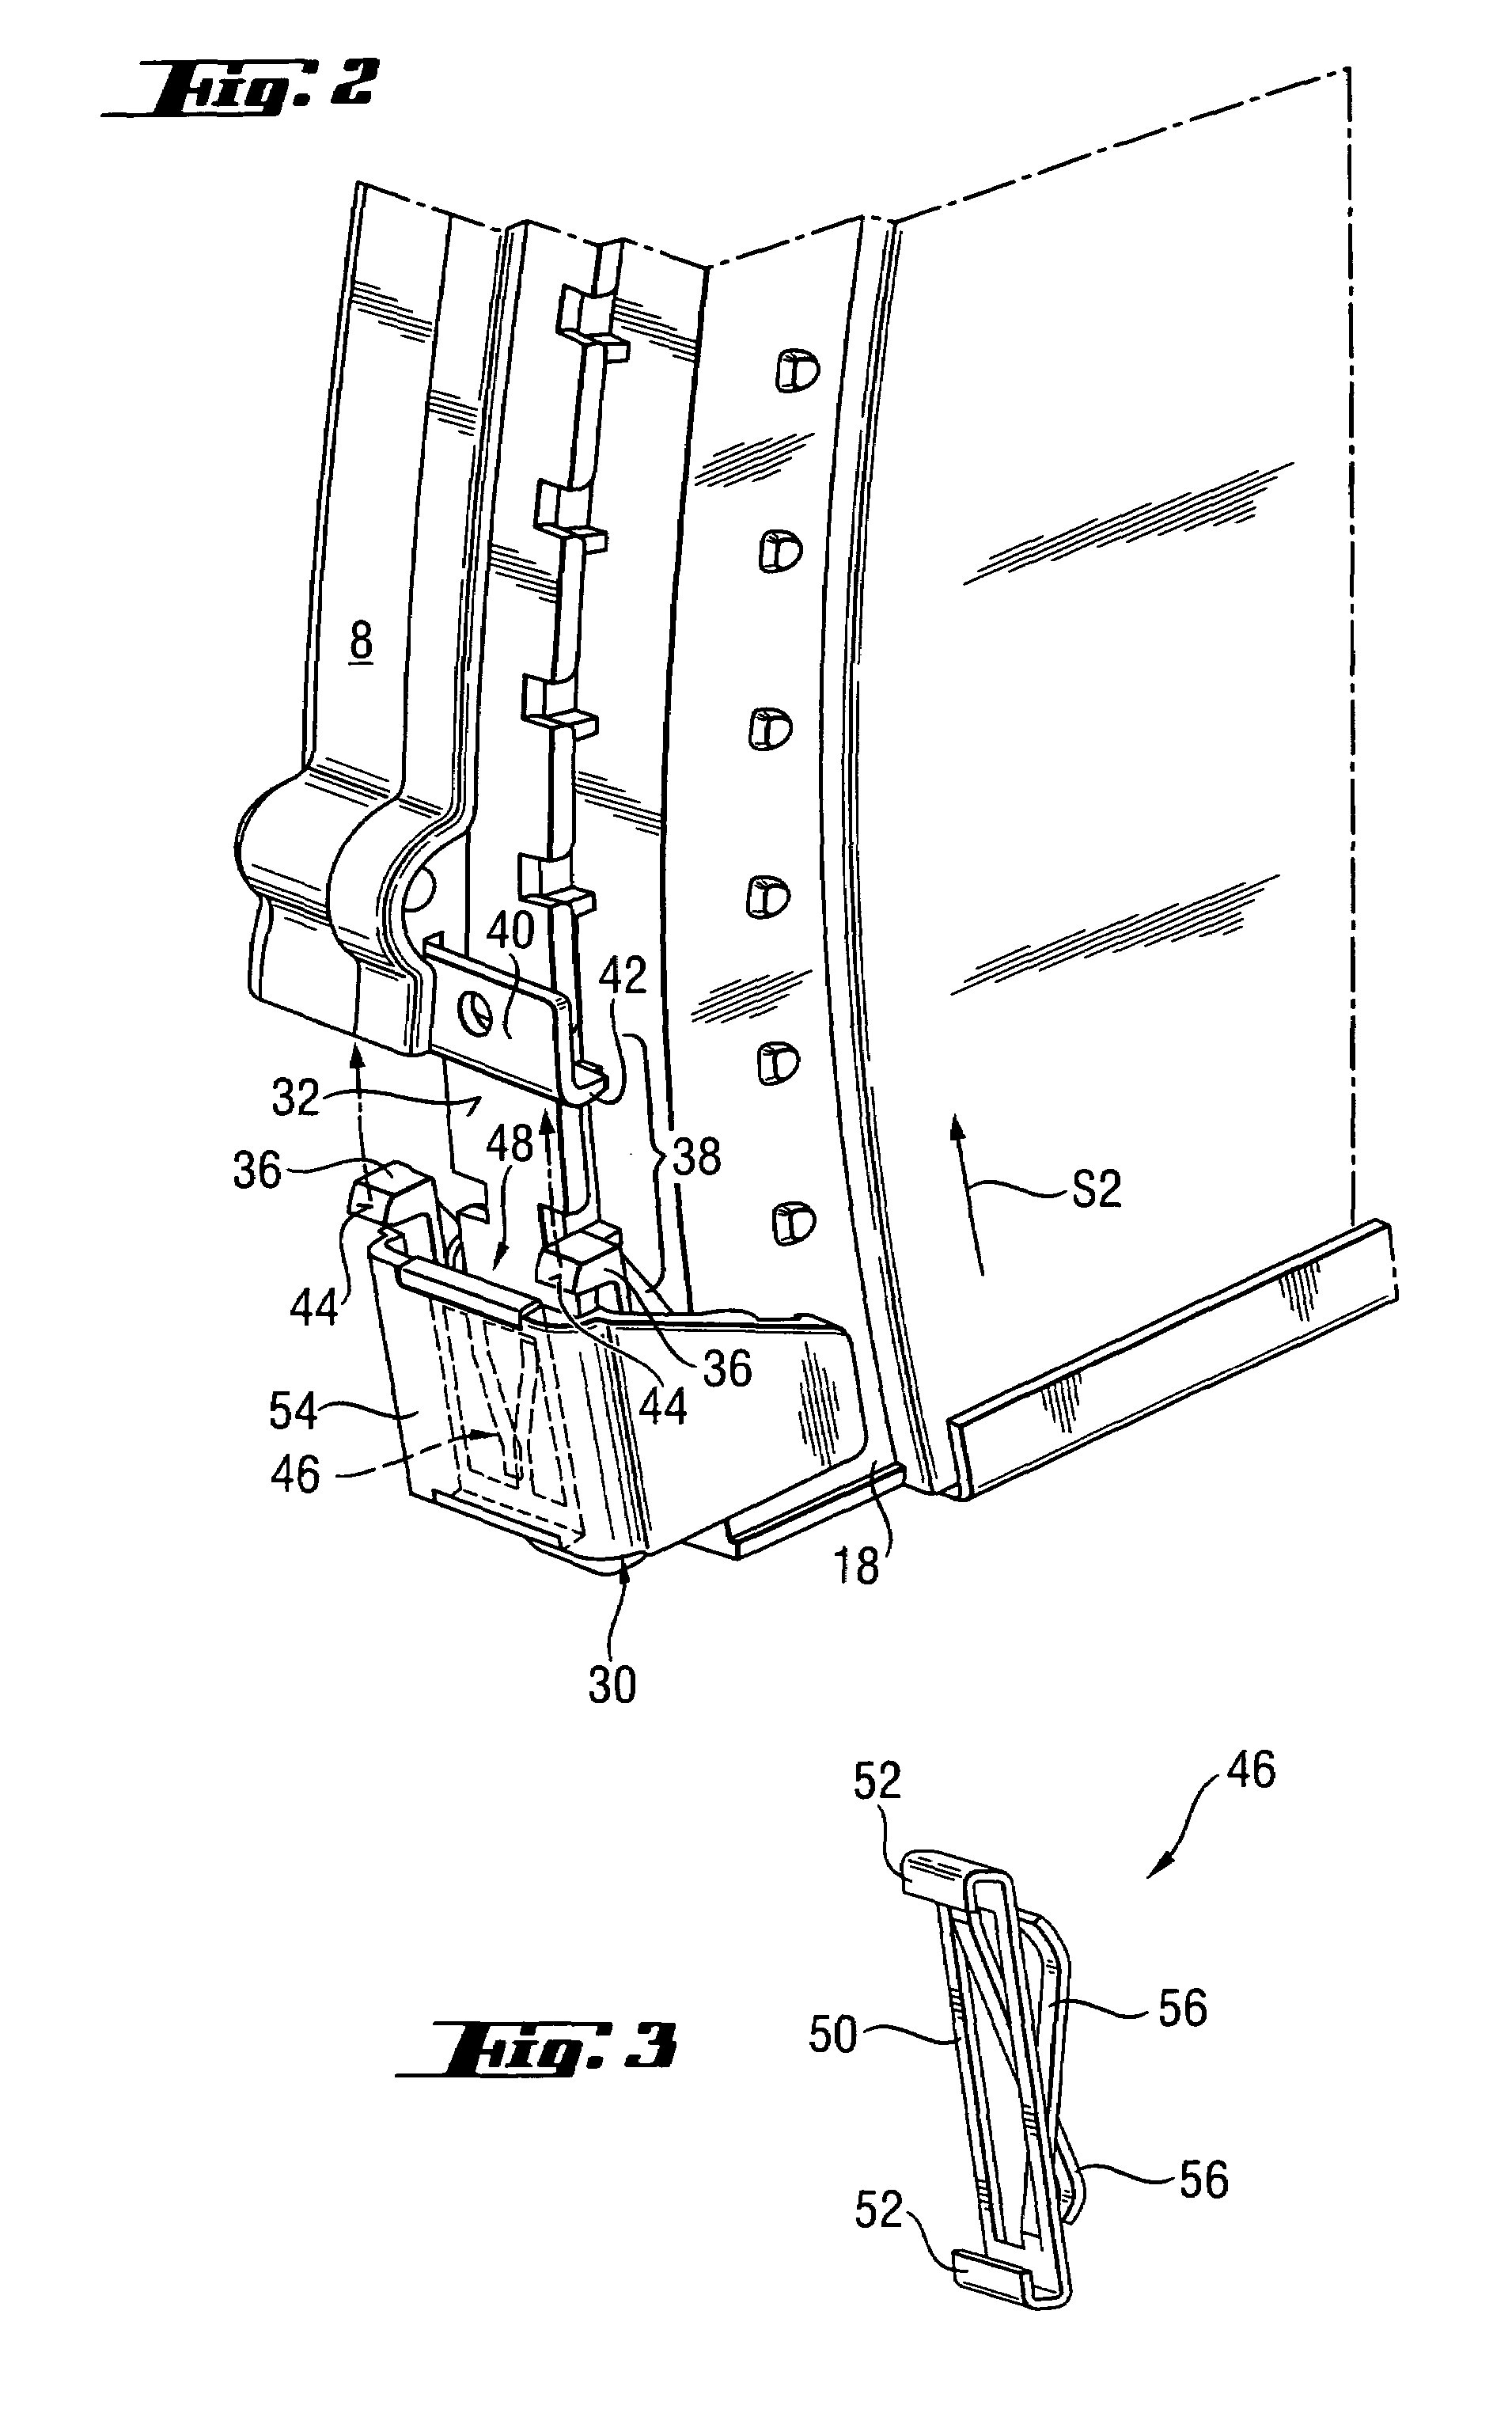 Covering device